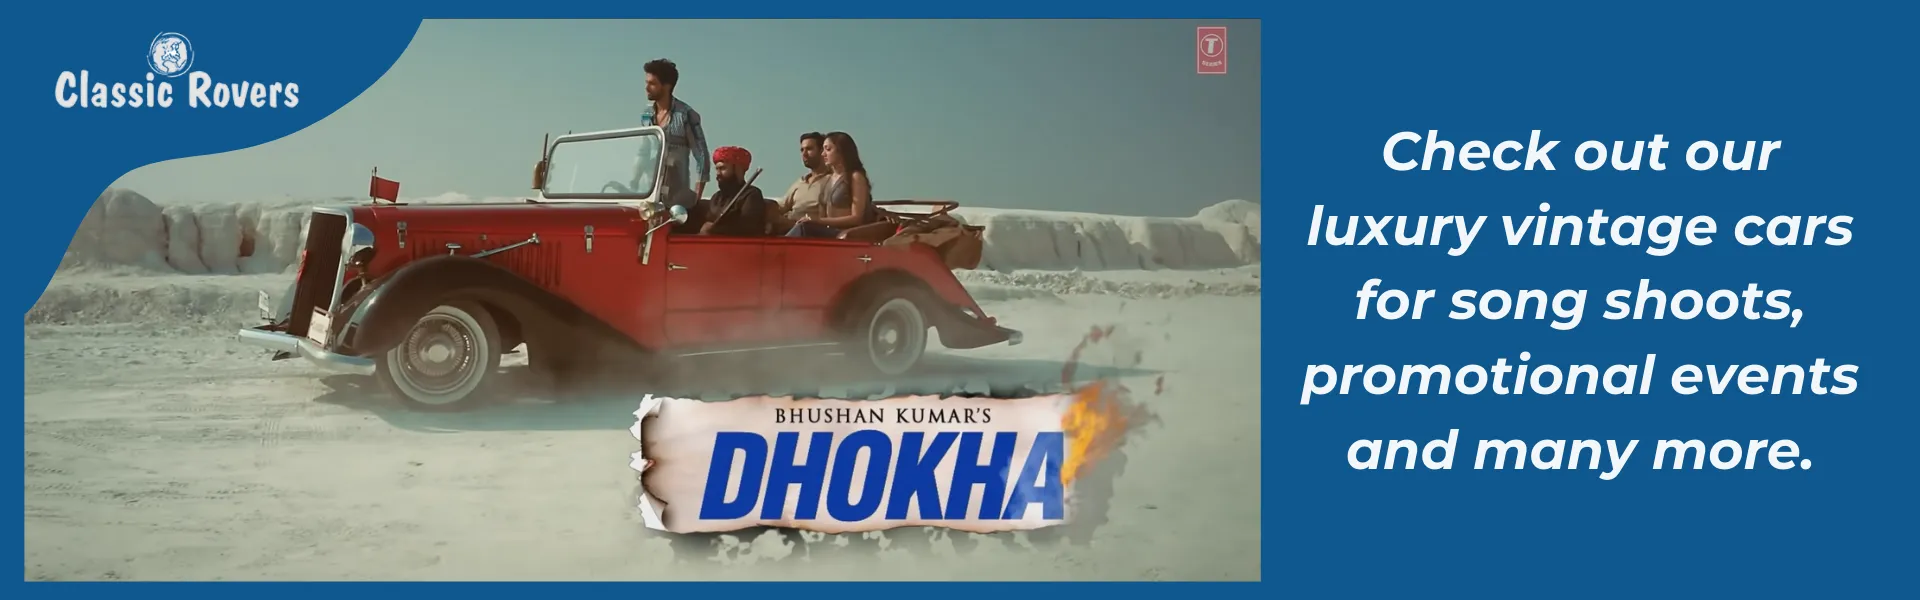 Classic Rovers Vintage Car in Song Dhokha by Arijit Singh